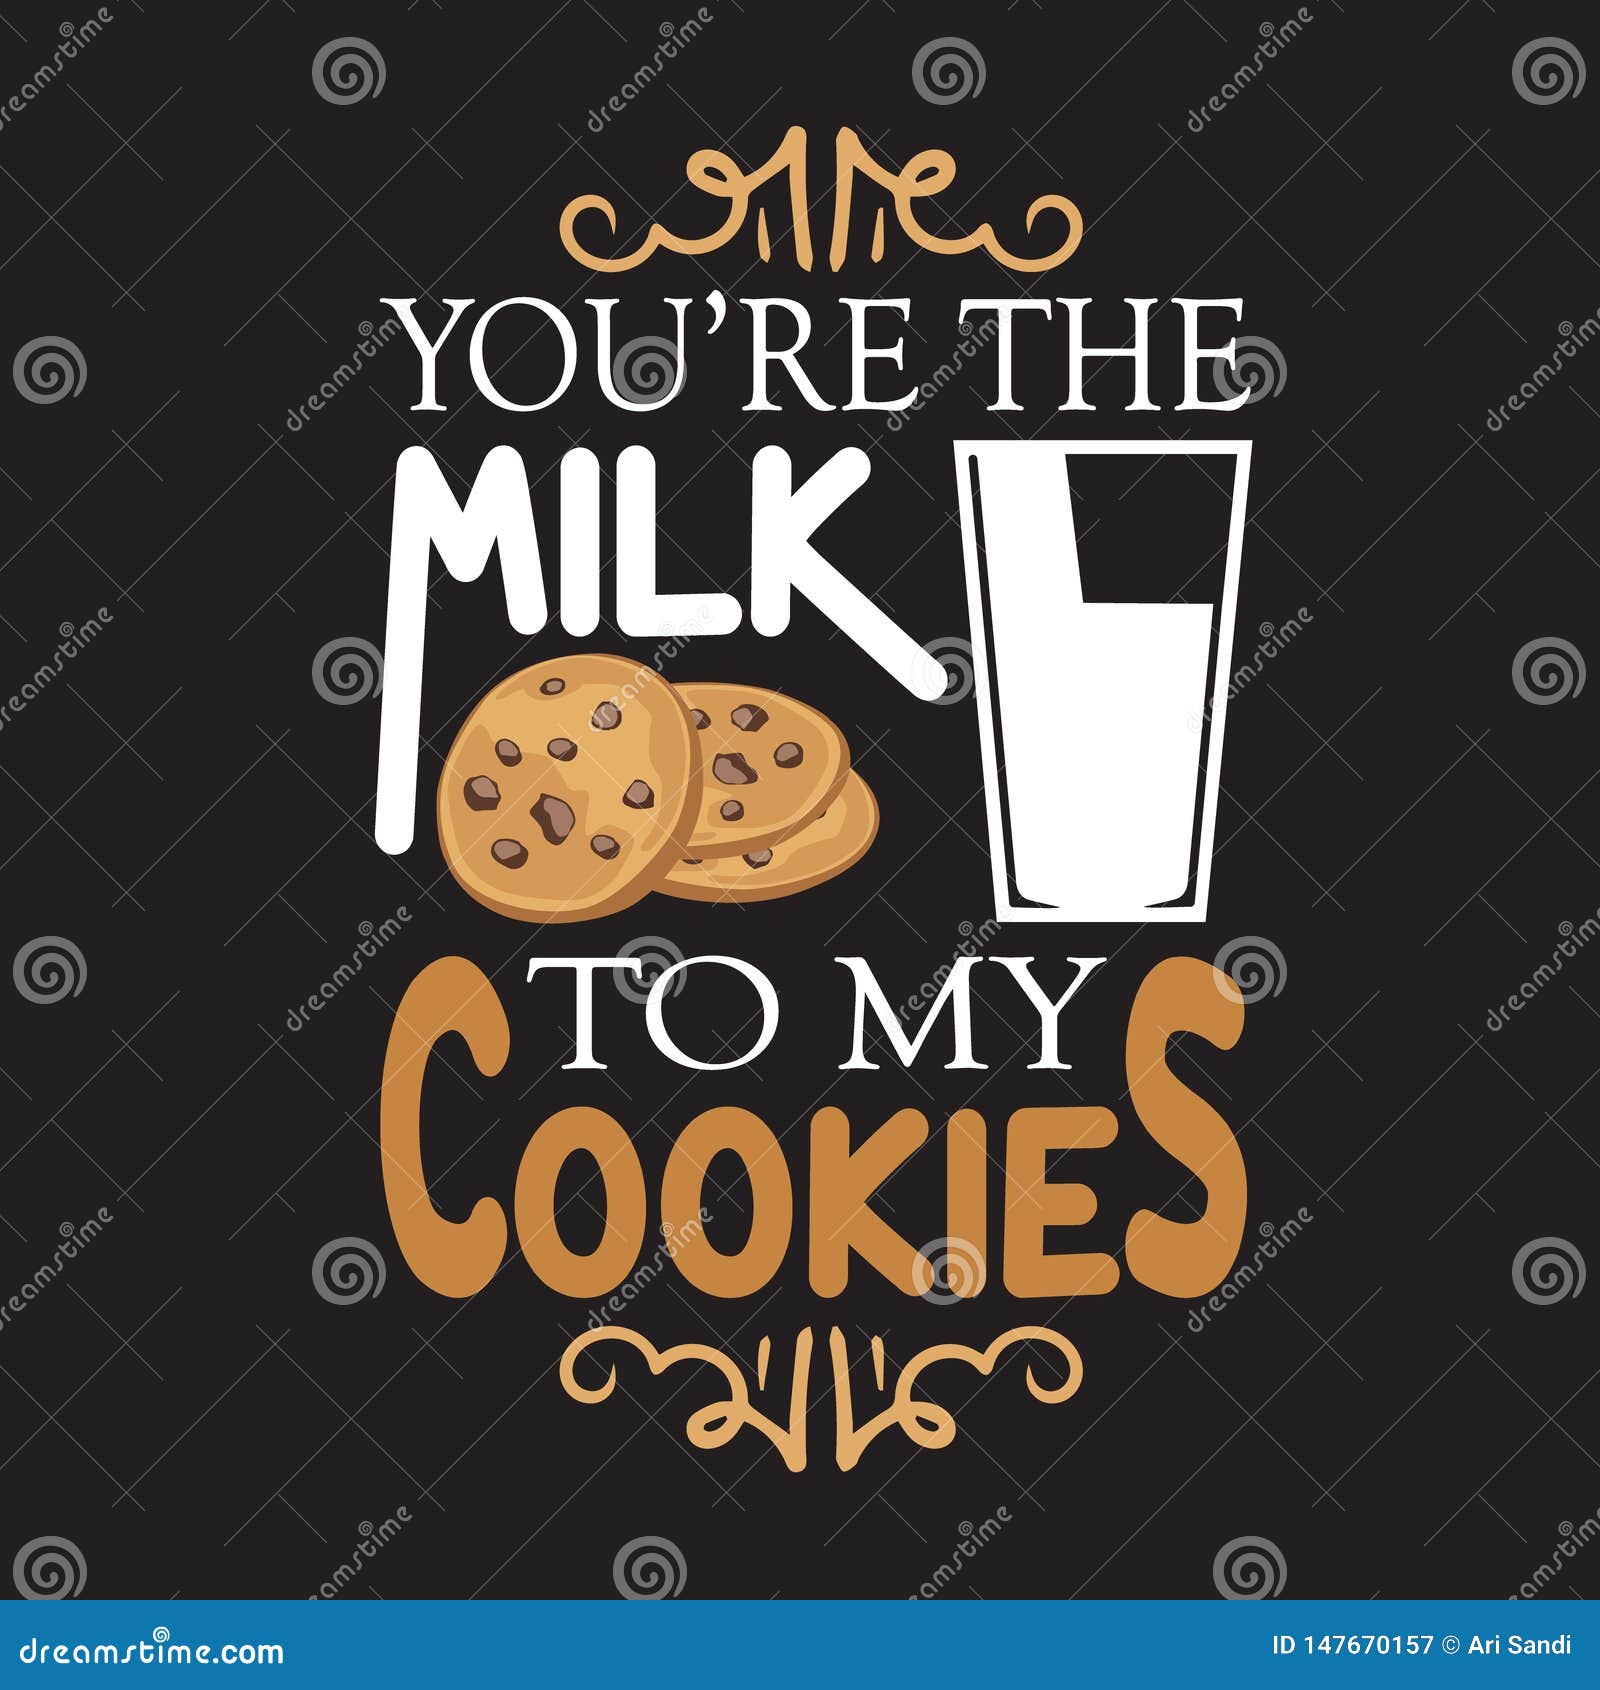 Chocolate Chip Quote And Saying Good For Print Design Stock Illustration - Illustration of wall ...